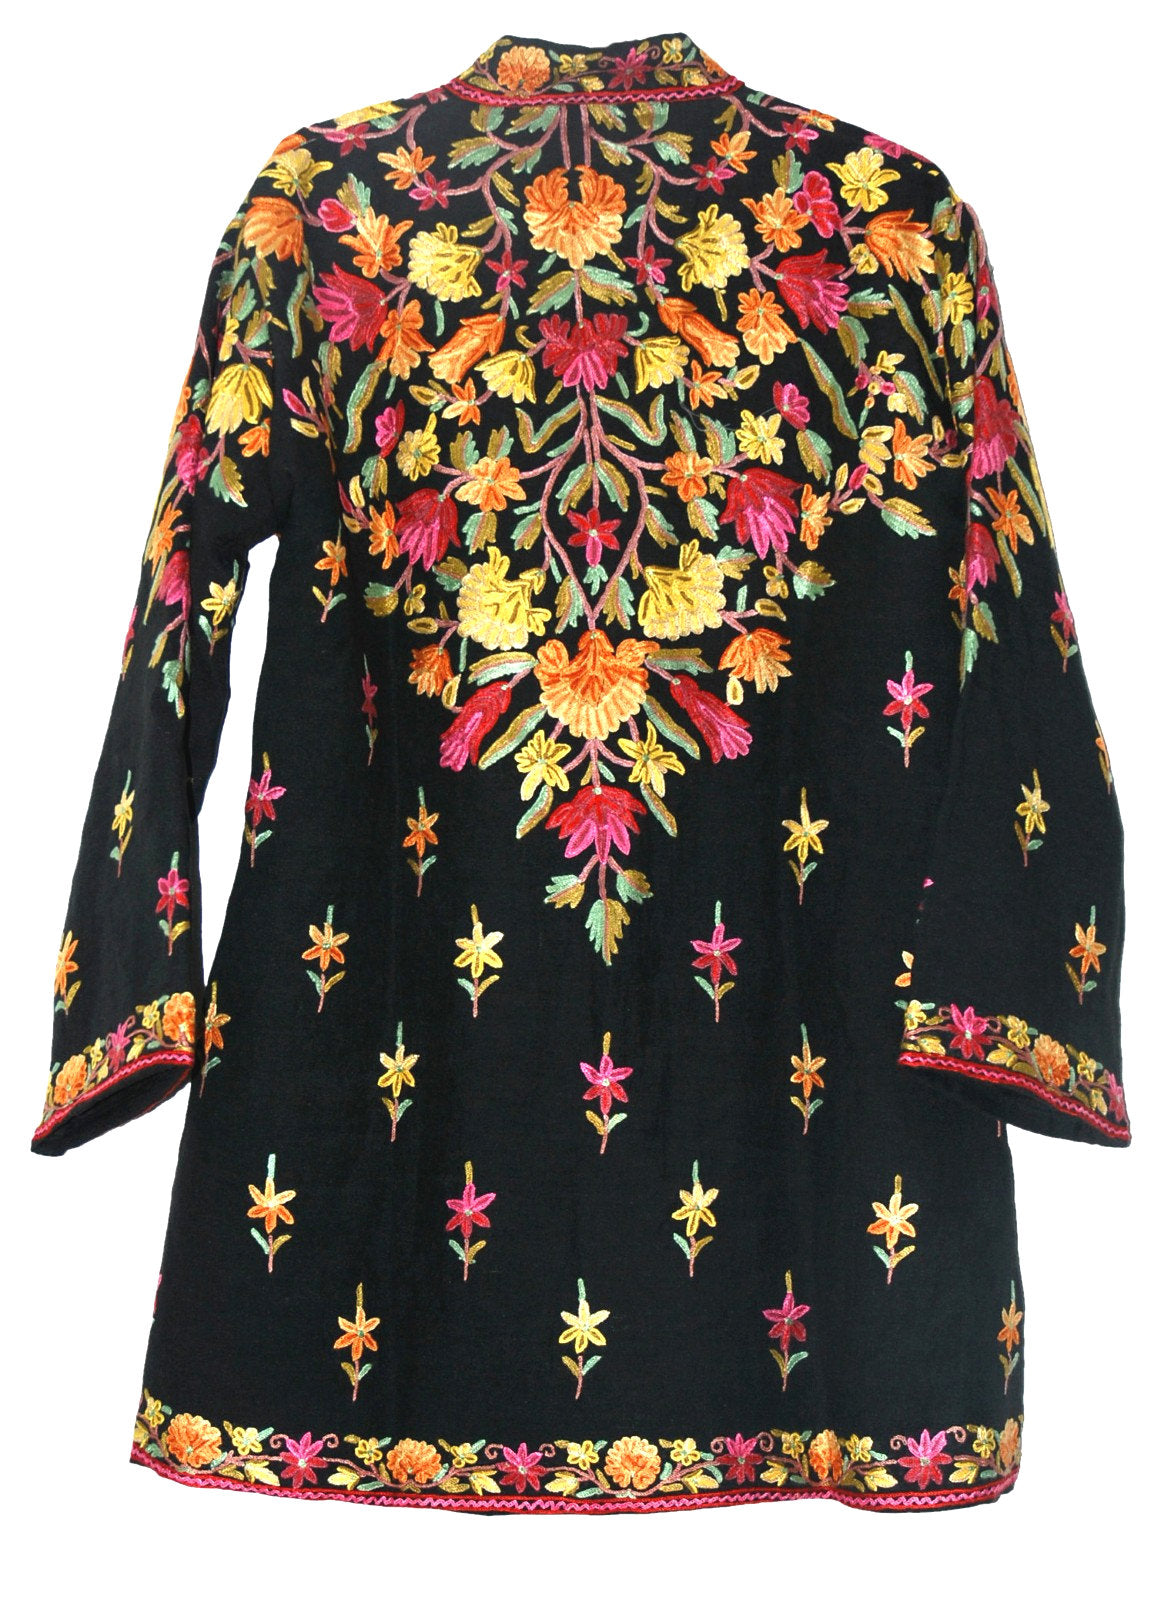 Embroidered Linen Jacket Black, Multicolor Embroidery #AO-504